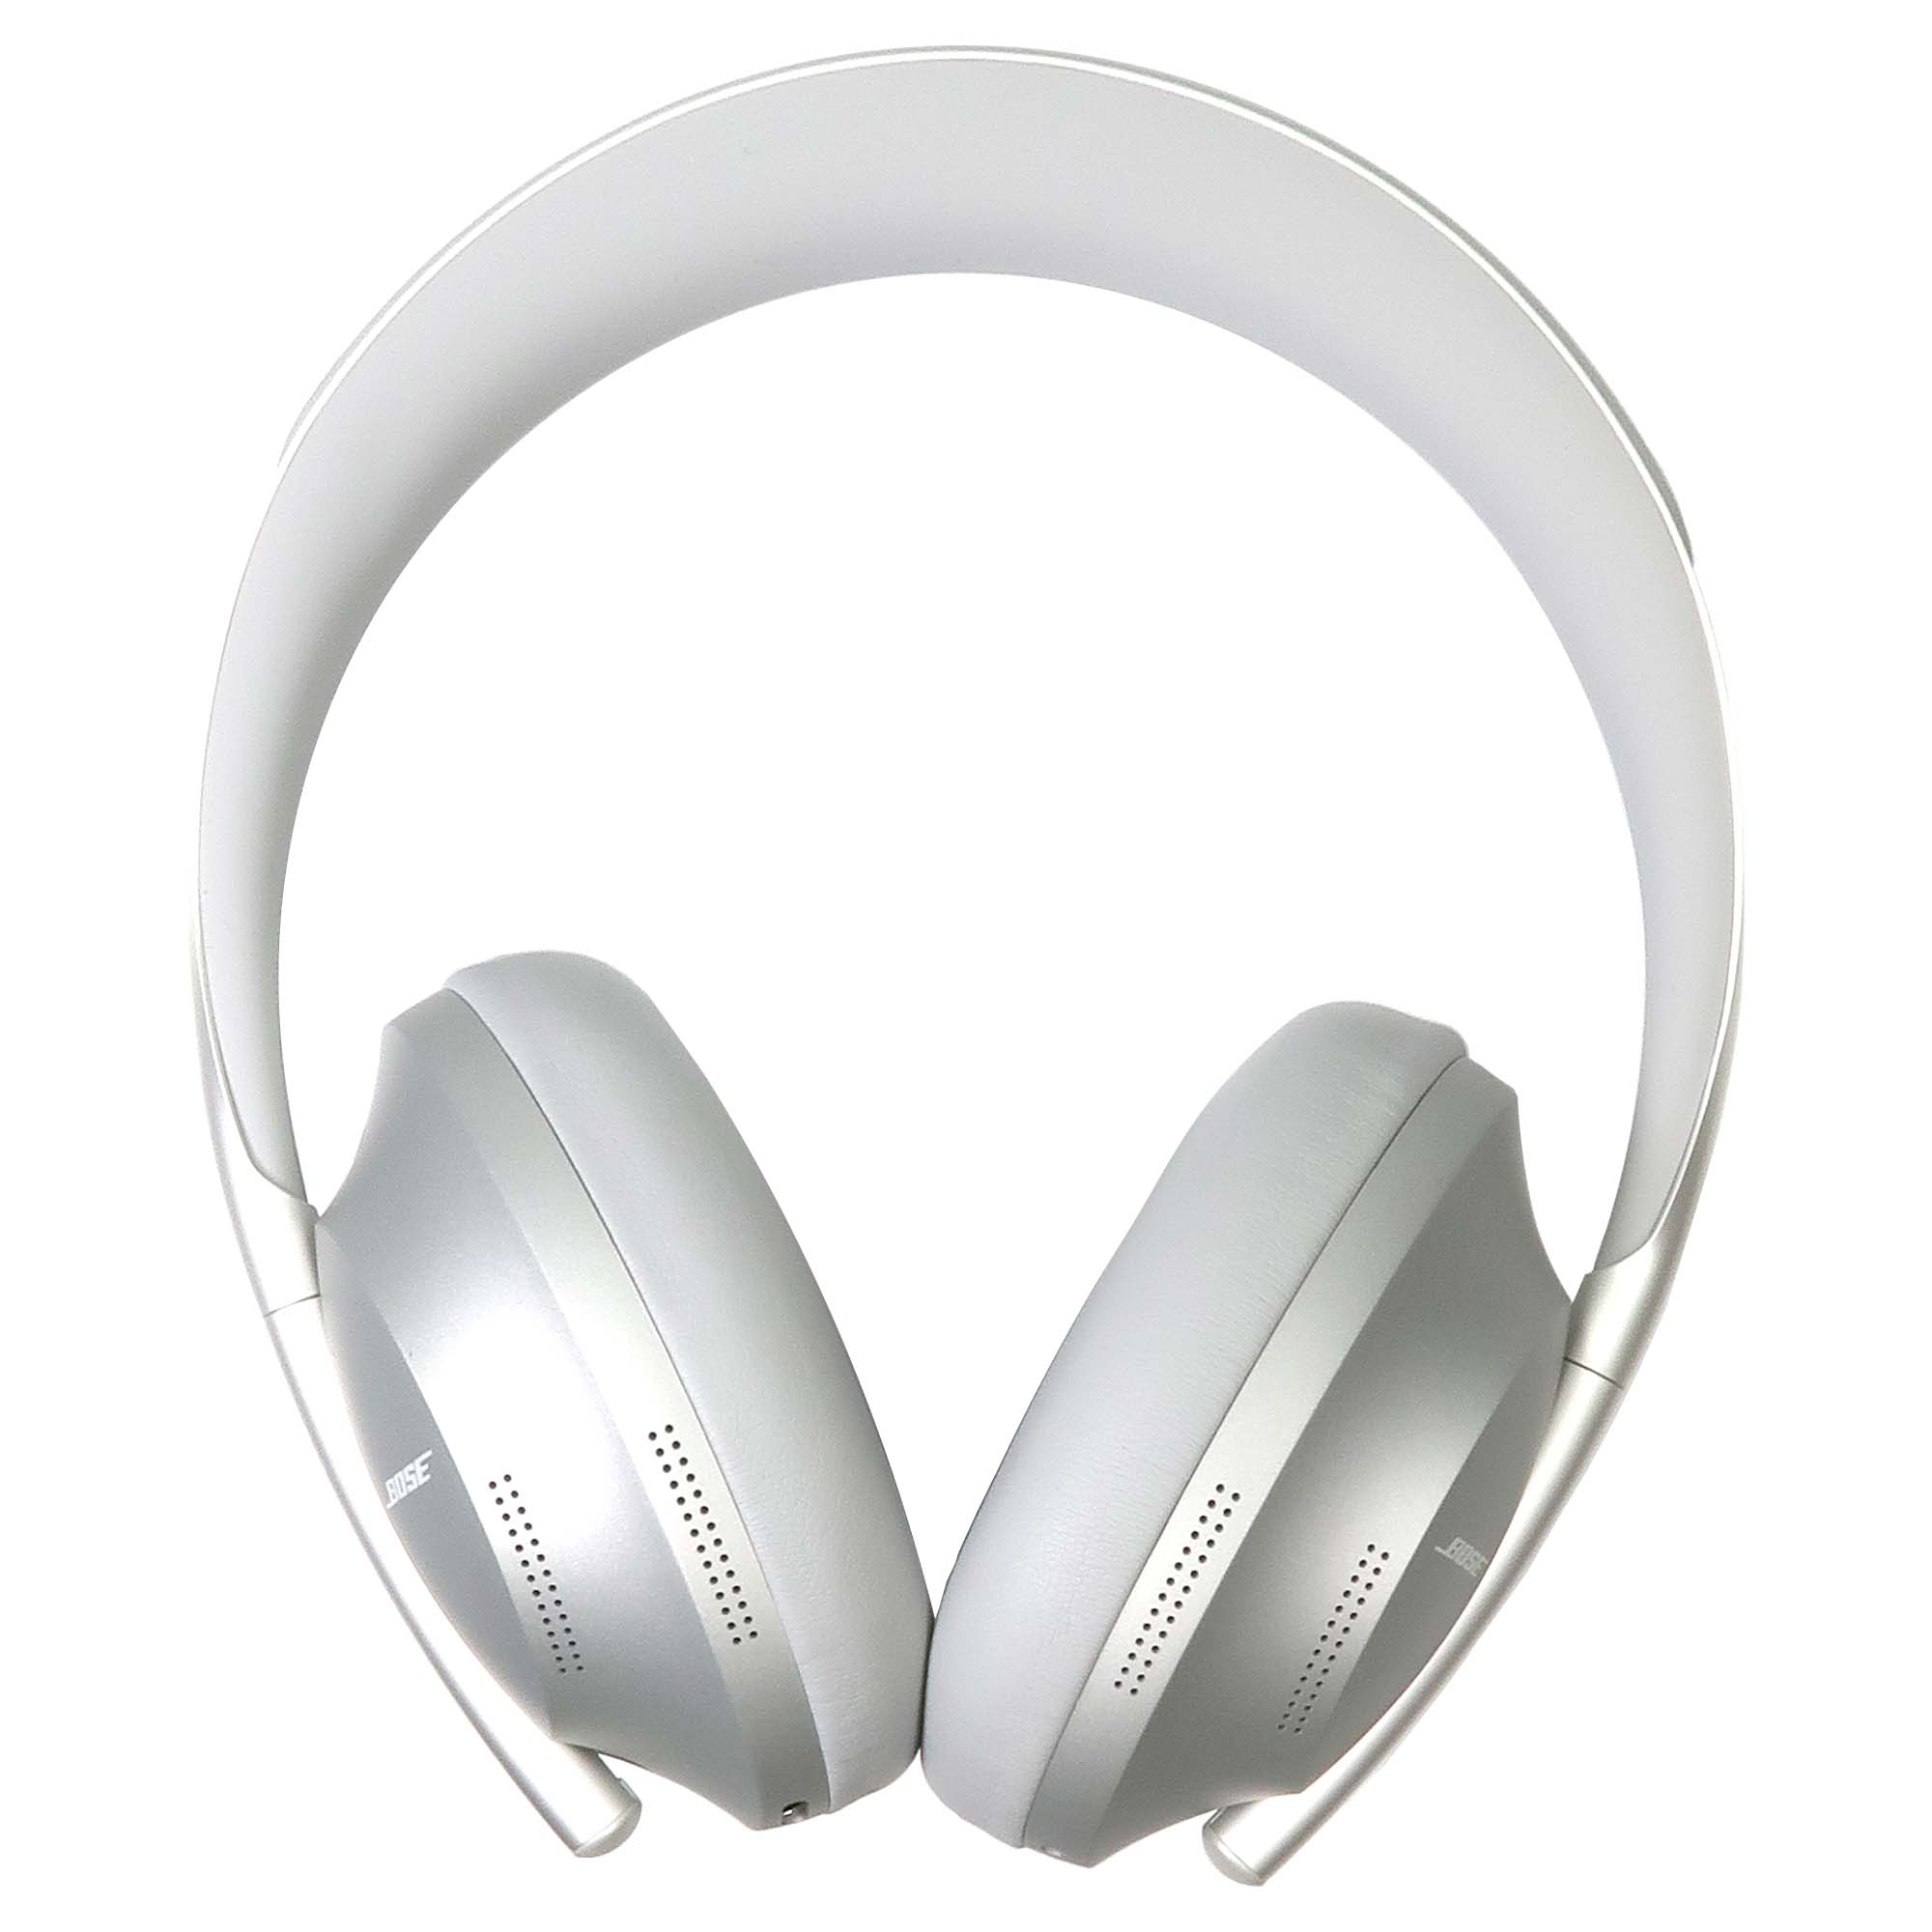 Bose Noise-Canceling 700 Bluetooth Headphones (Silver) – The Teds